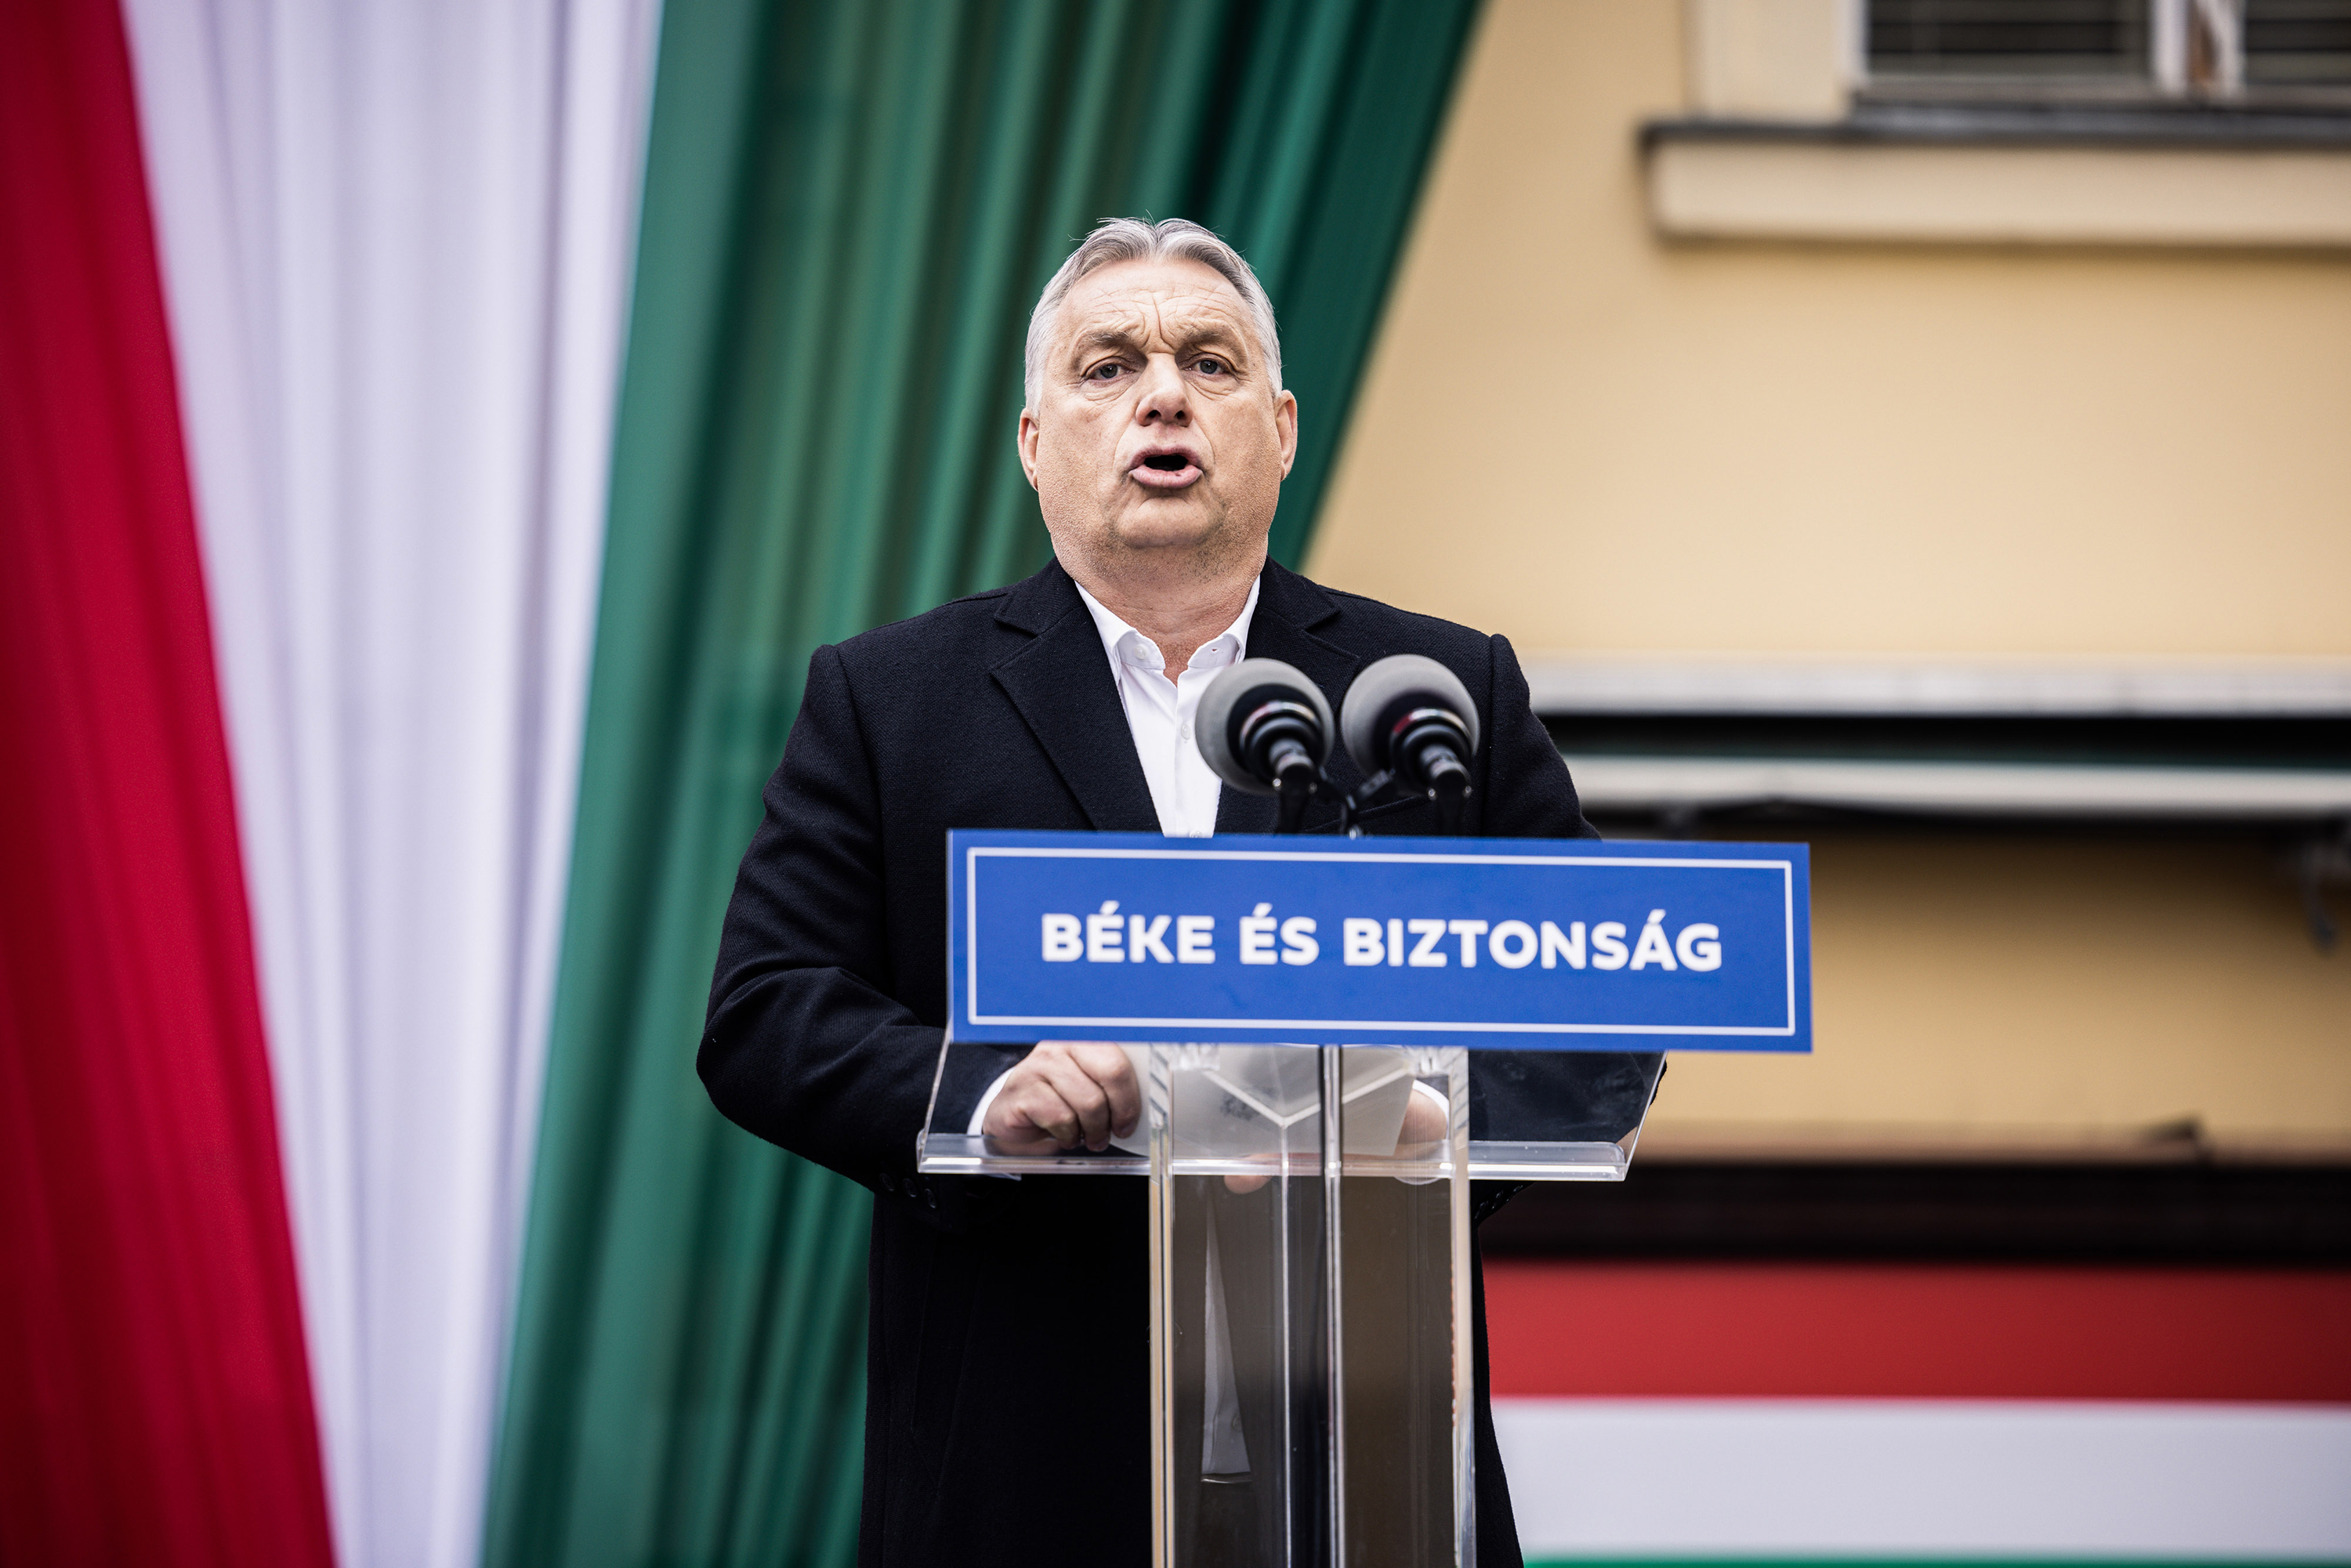 Viktor Orban, Hungary's prime minister, delivers his final campaign speech ahead of the general election in Szekesfehervar, Hungary on Friday, April 1.